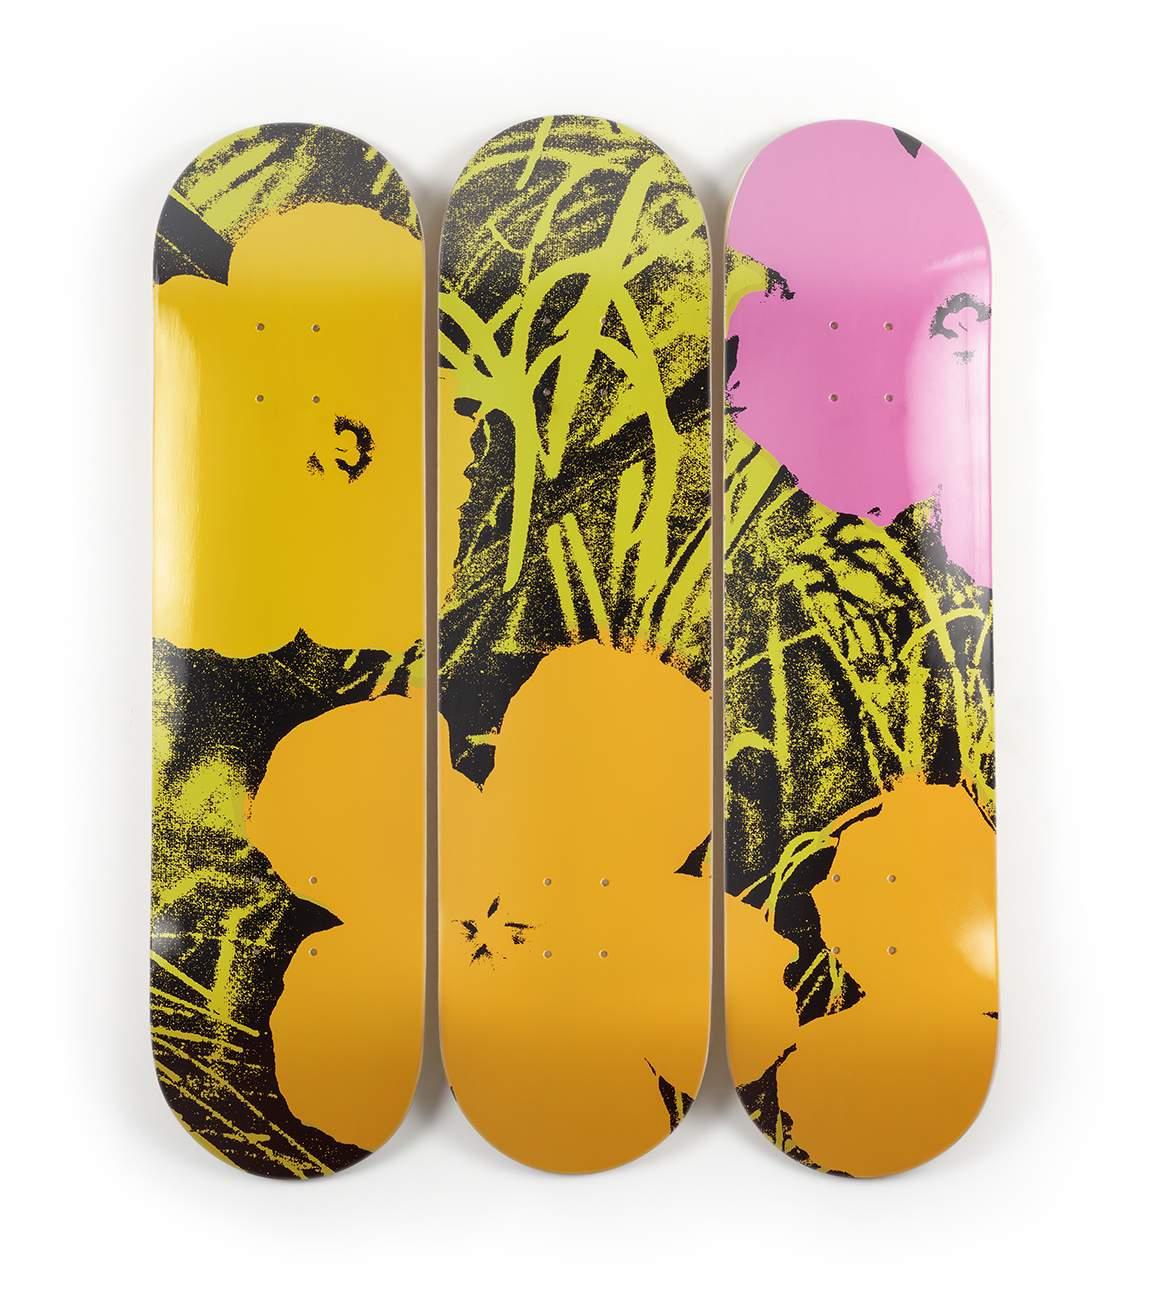 Andy Warhol FLOWERS (LIME/ORANGE)
Date of creation: 2019
Medium: Digital print on Canadian maple wood
Edition: 500
Size: 80 x 20 cm (each skate)
Condition: In mint conditions and never displayed
This work is formed by three skate decks made of 7 ply